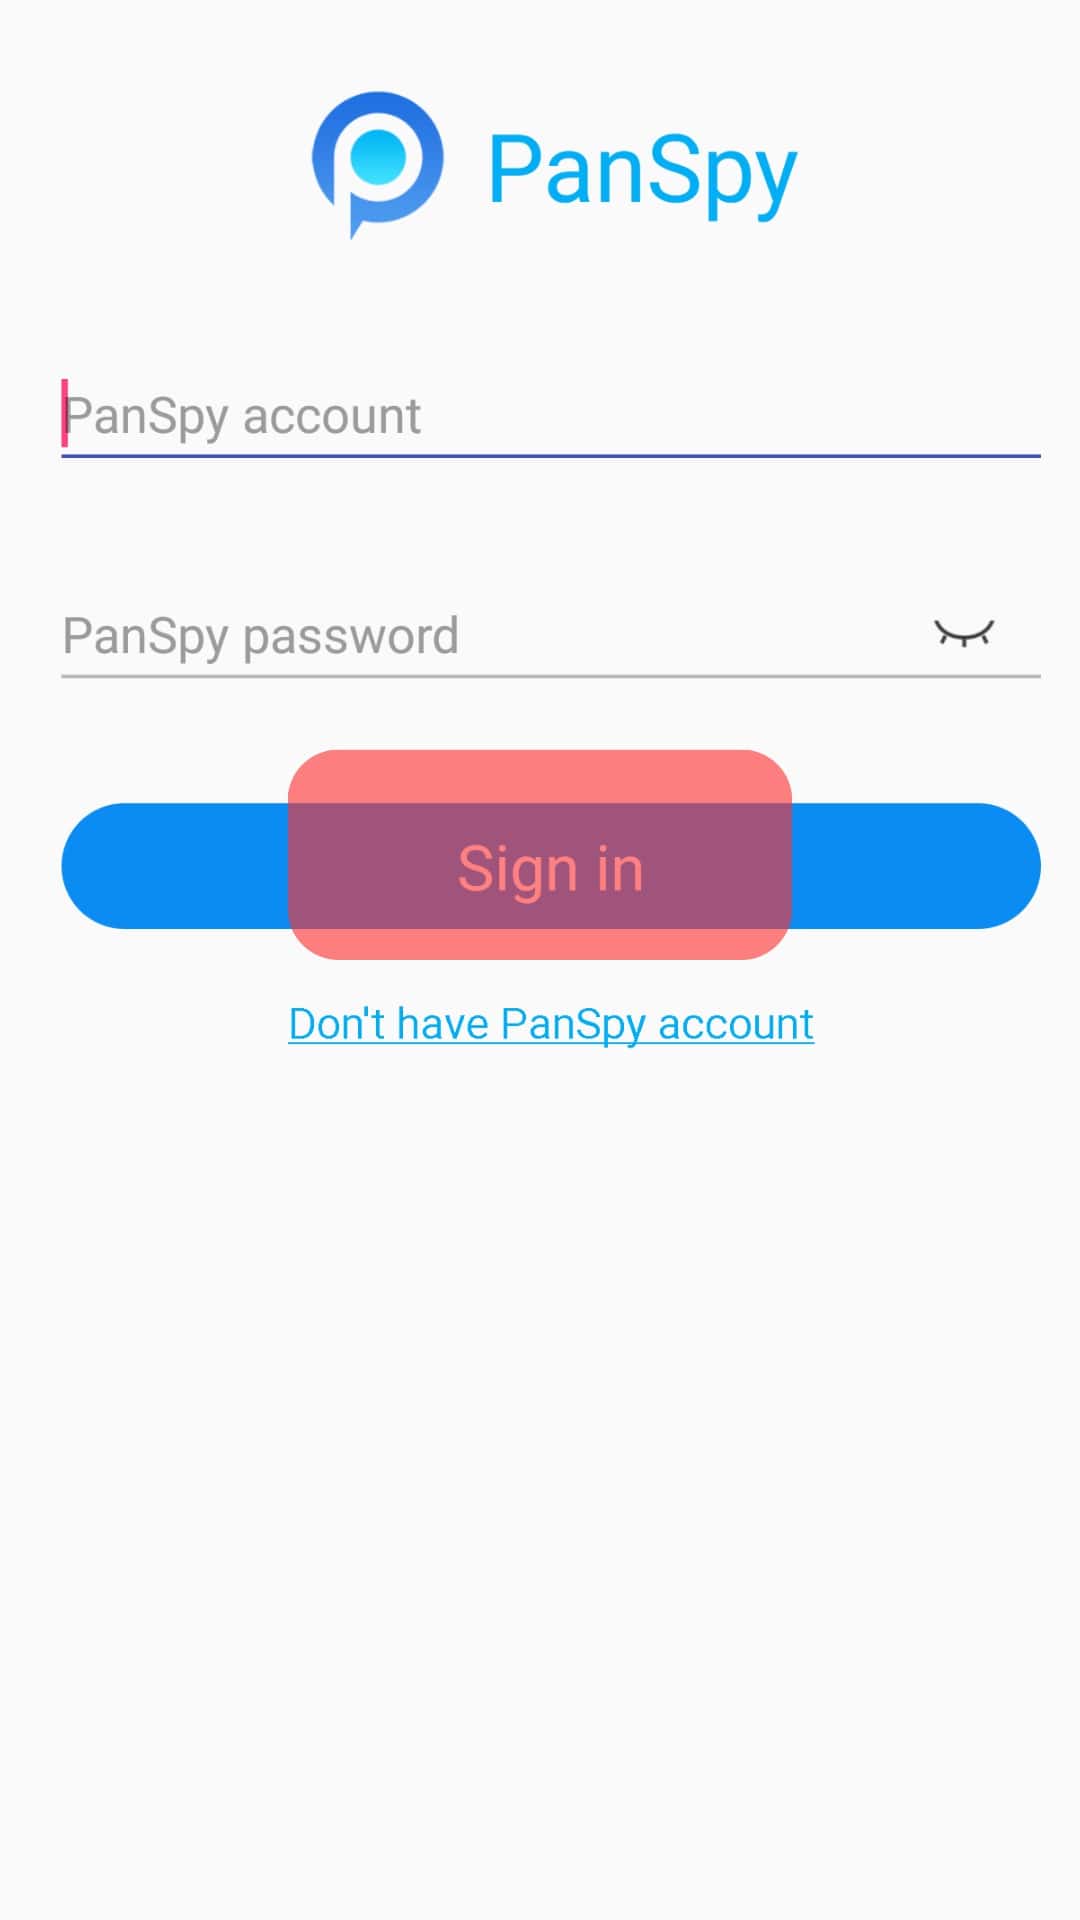 Log In With Your Panspy Account